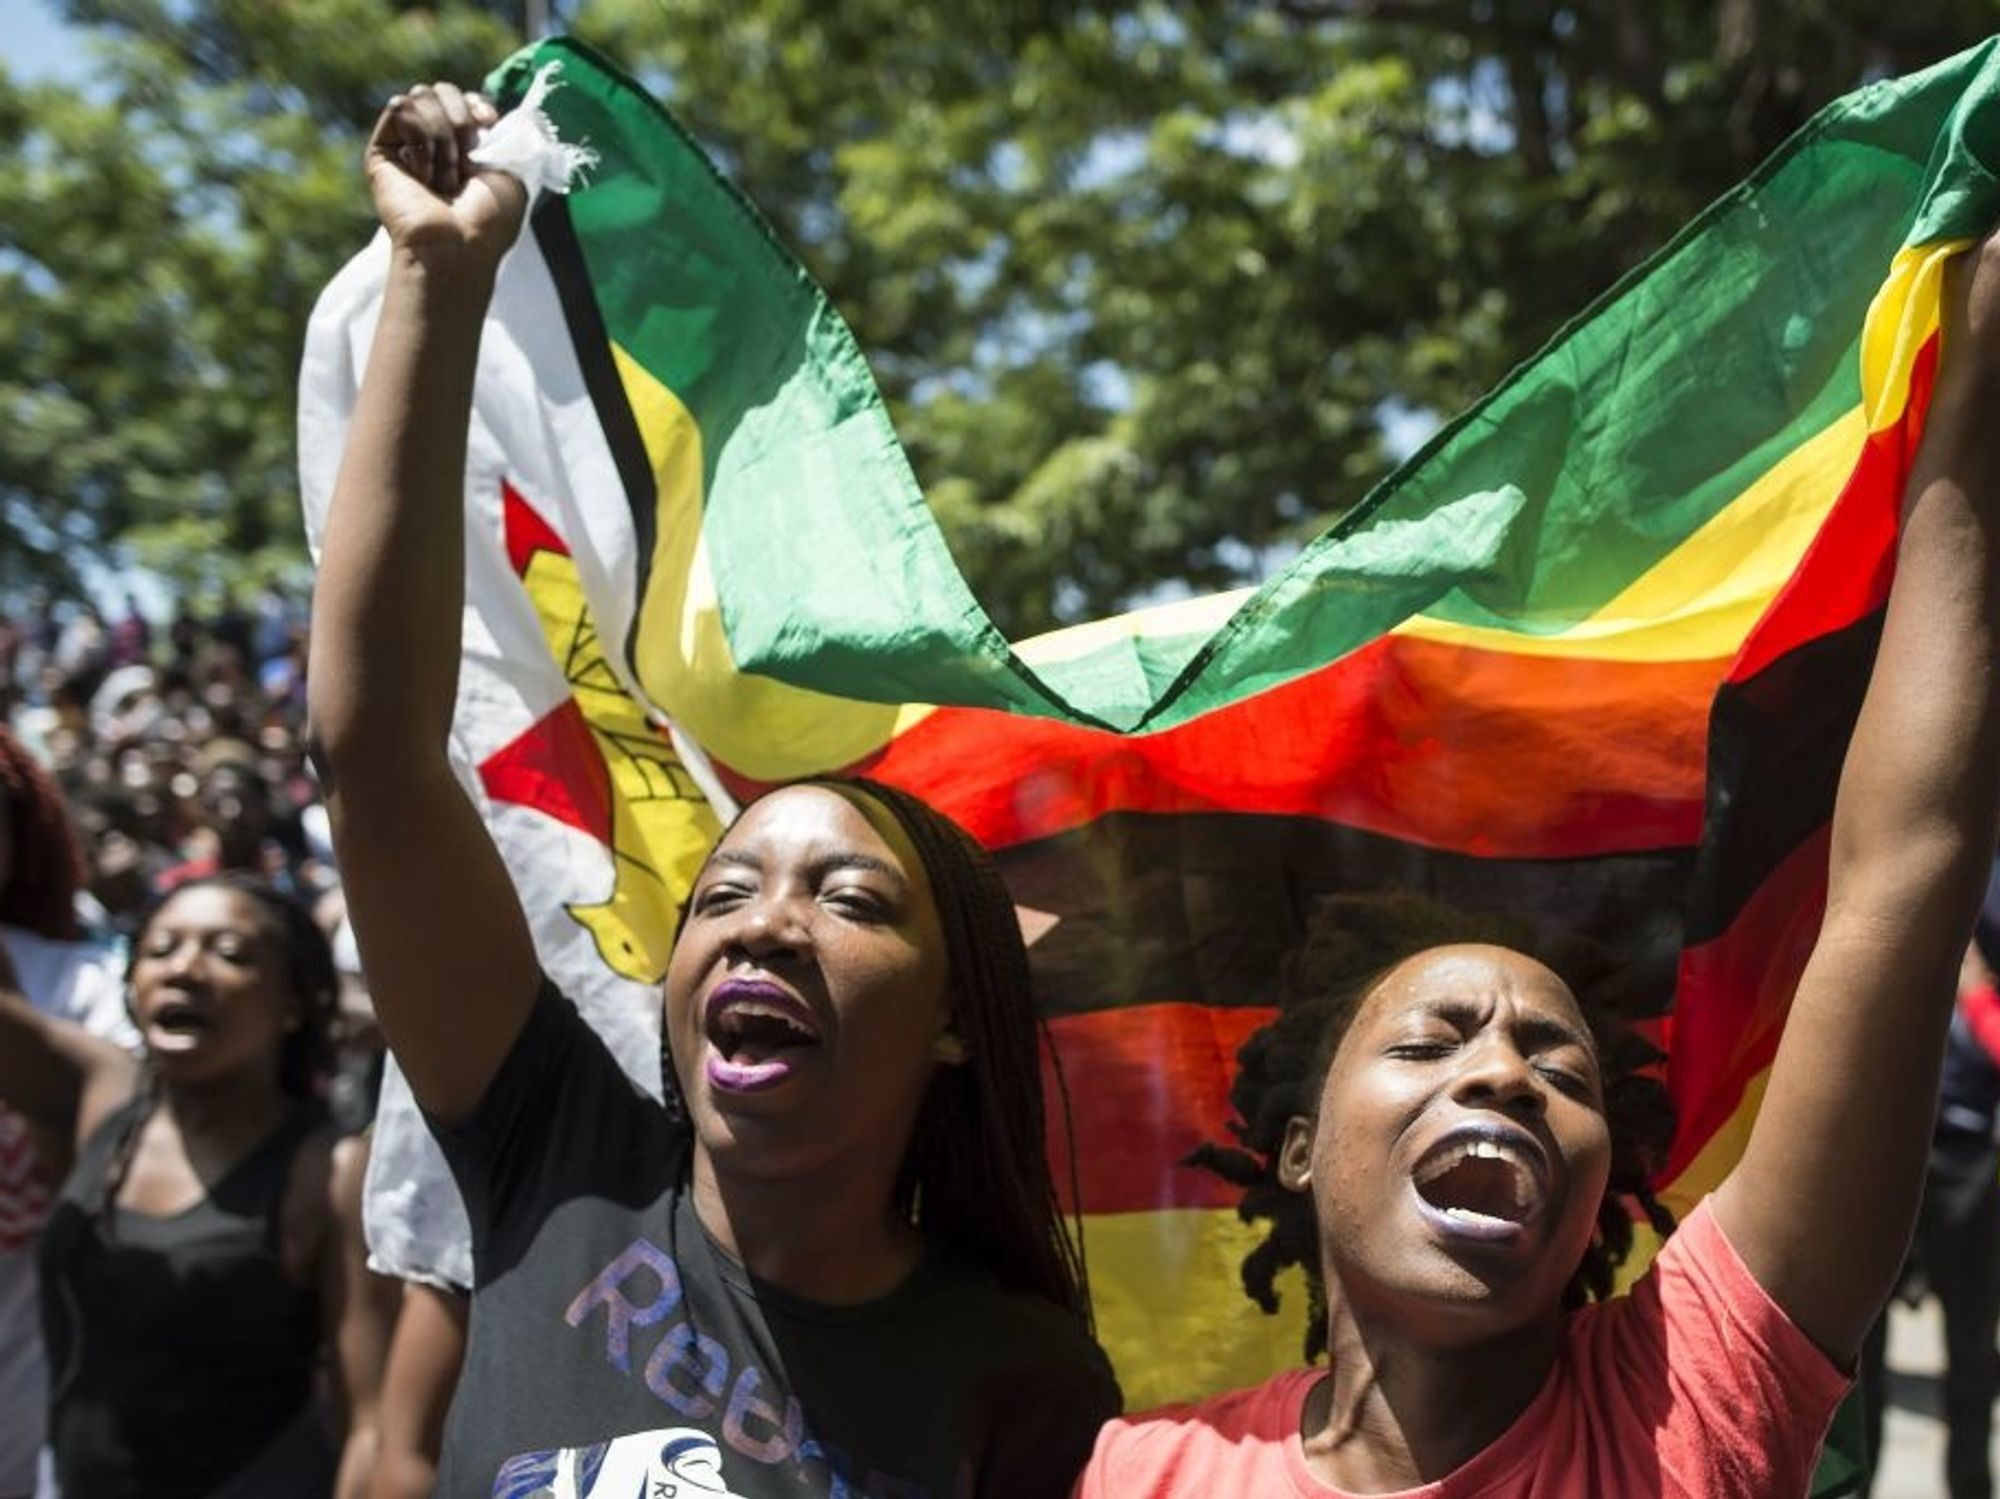 Women holding a flag of Zimbabwe take part in a demonstration of University of Zimbabwe's students, on November 20, 2017 in Harare, to demand the withdrawal of Grace Mugabe's doctorate and refused to sit their exams as pressure builds on Zimbabwe's President Robert Mugabe to resign.